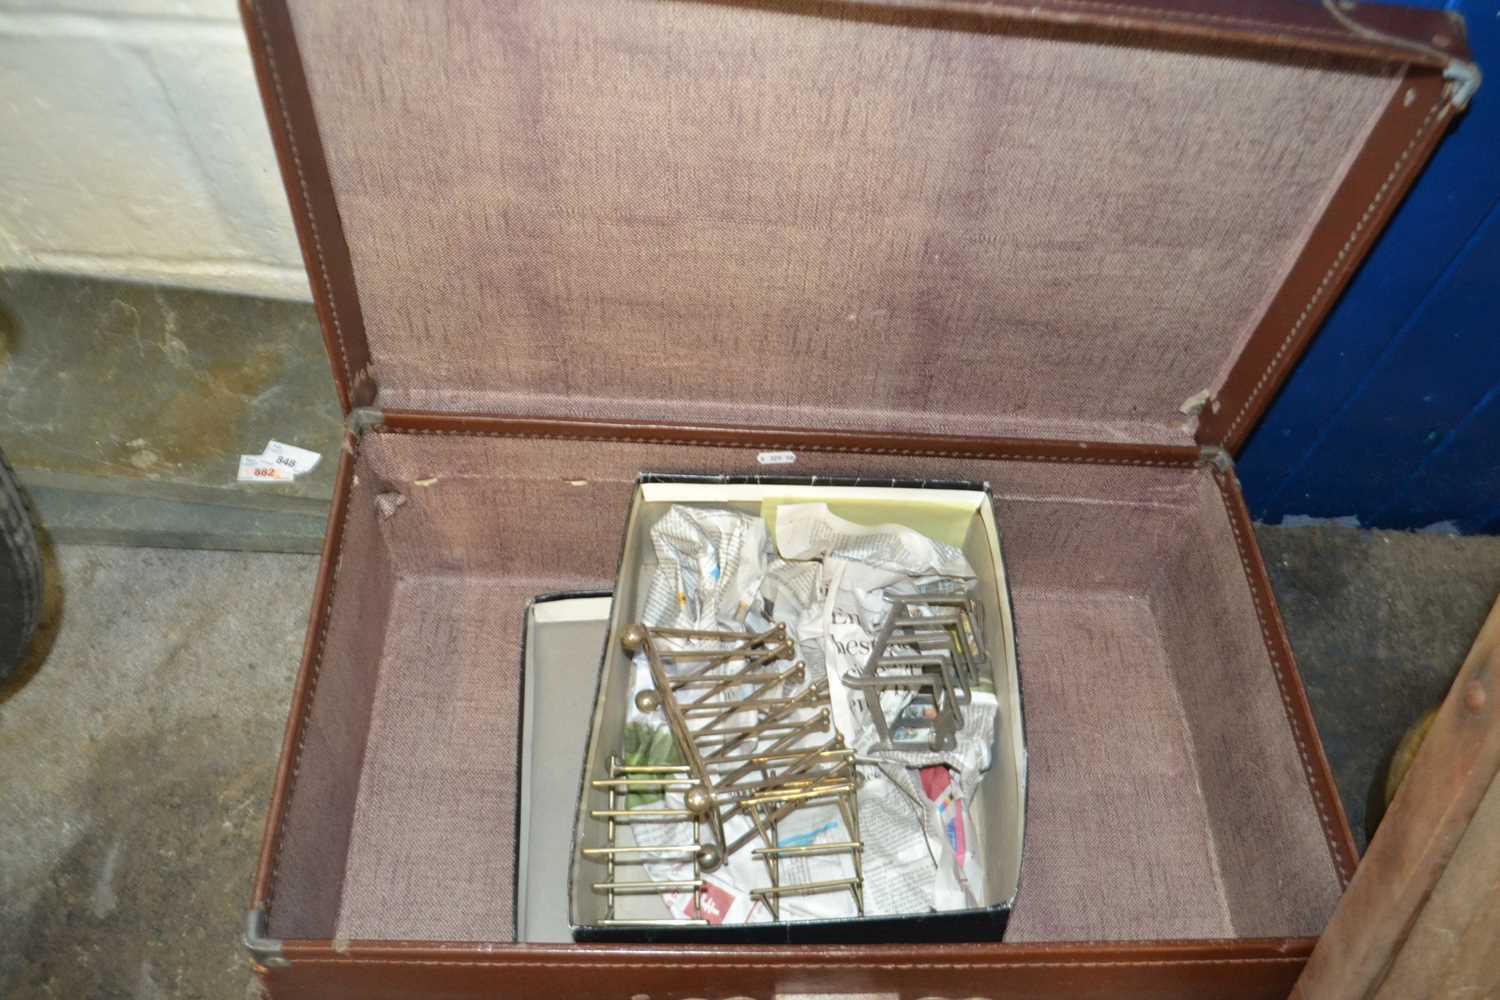 Four metal toast racks (one possible Christopher Dresser) together with a vintage suitcase